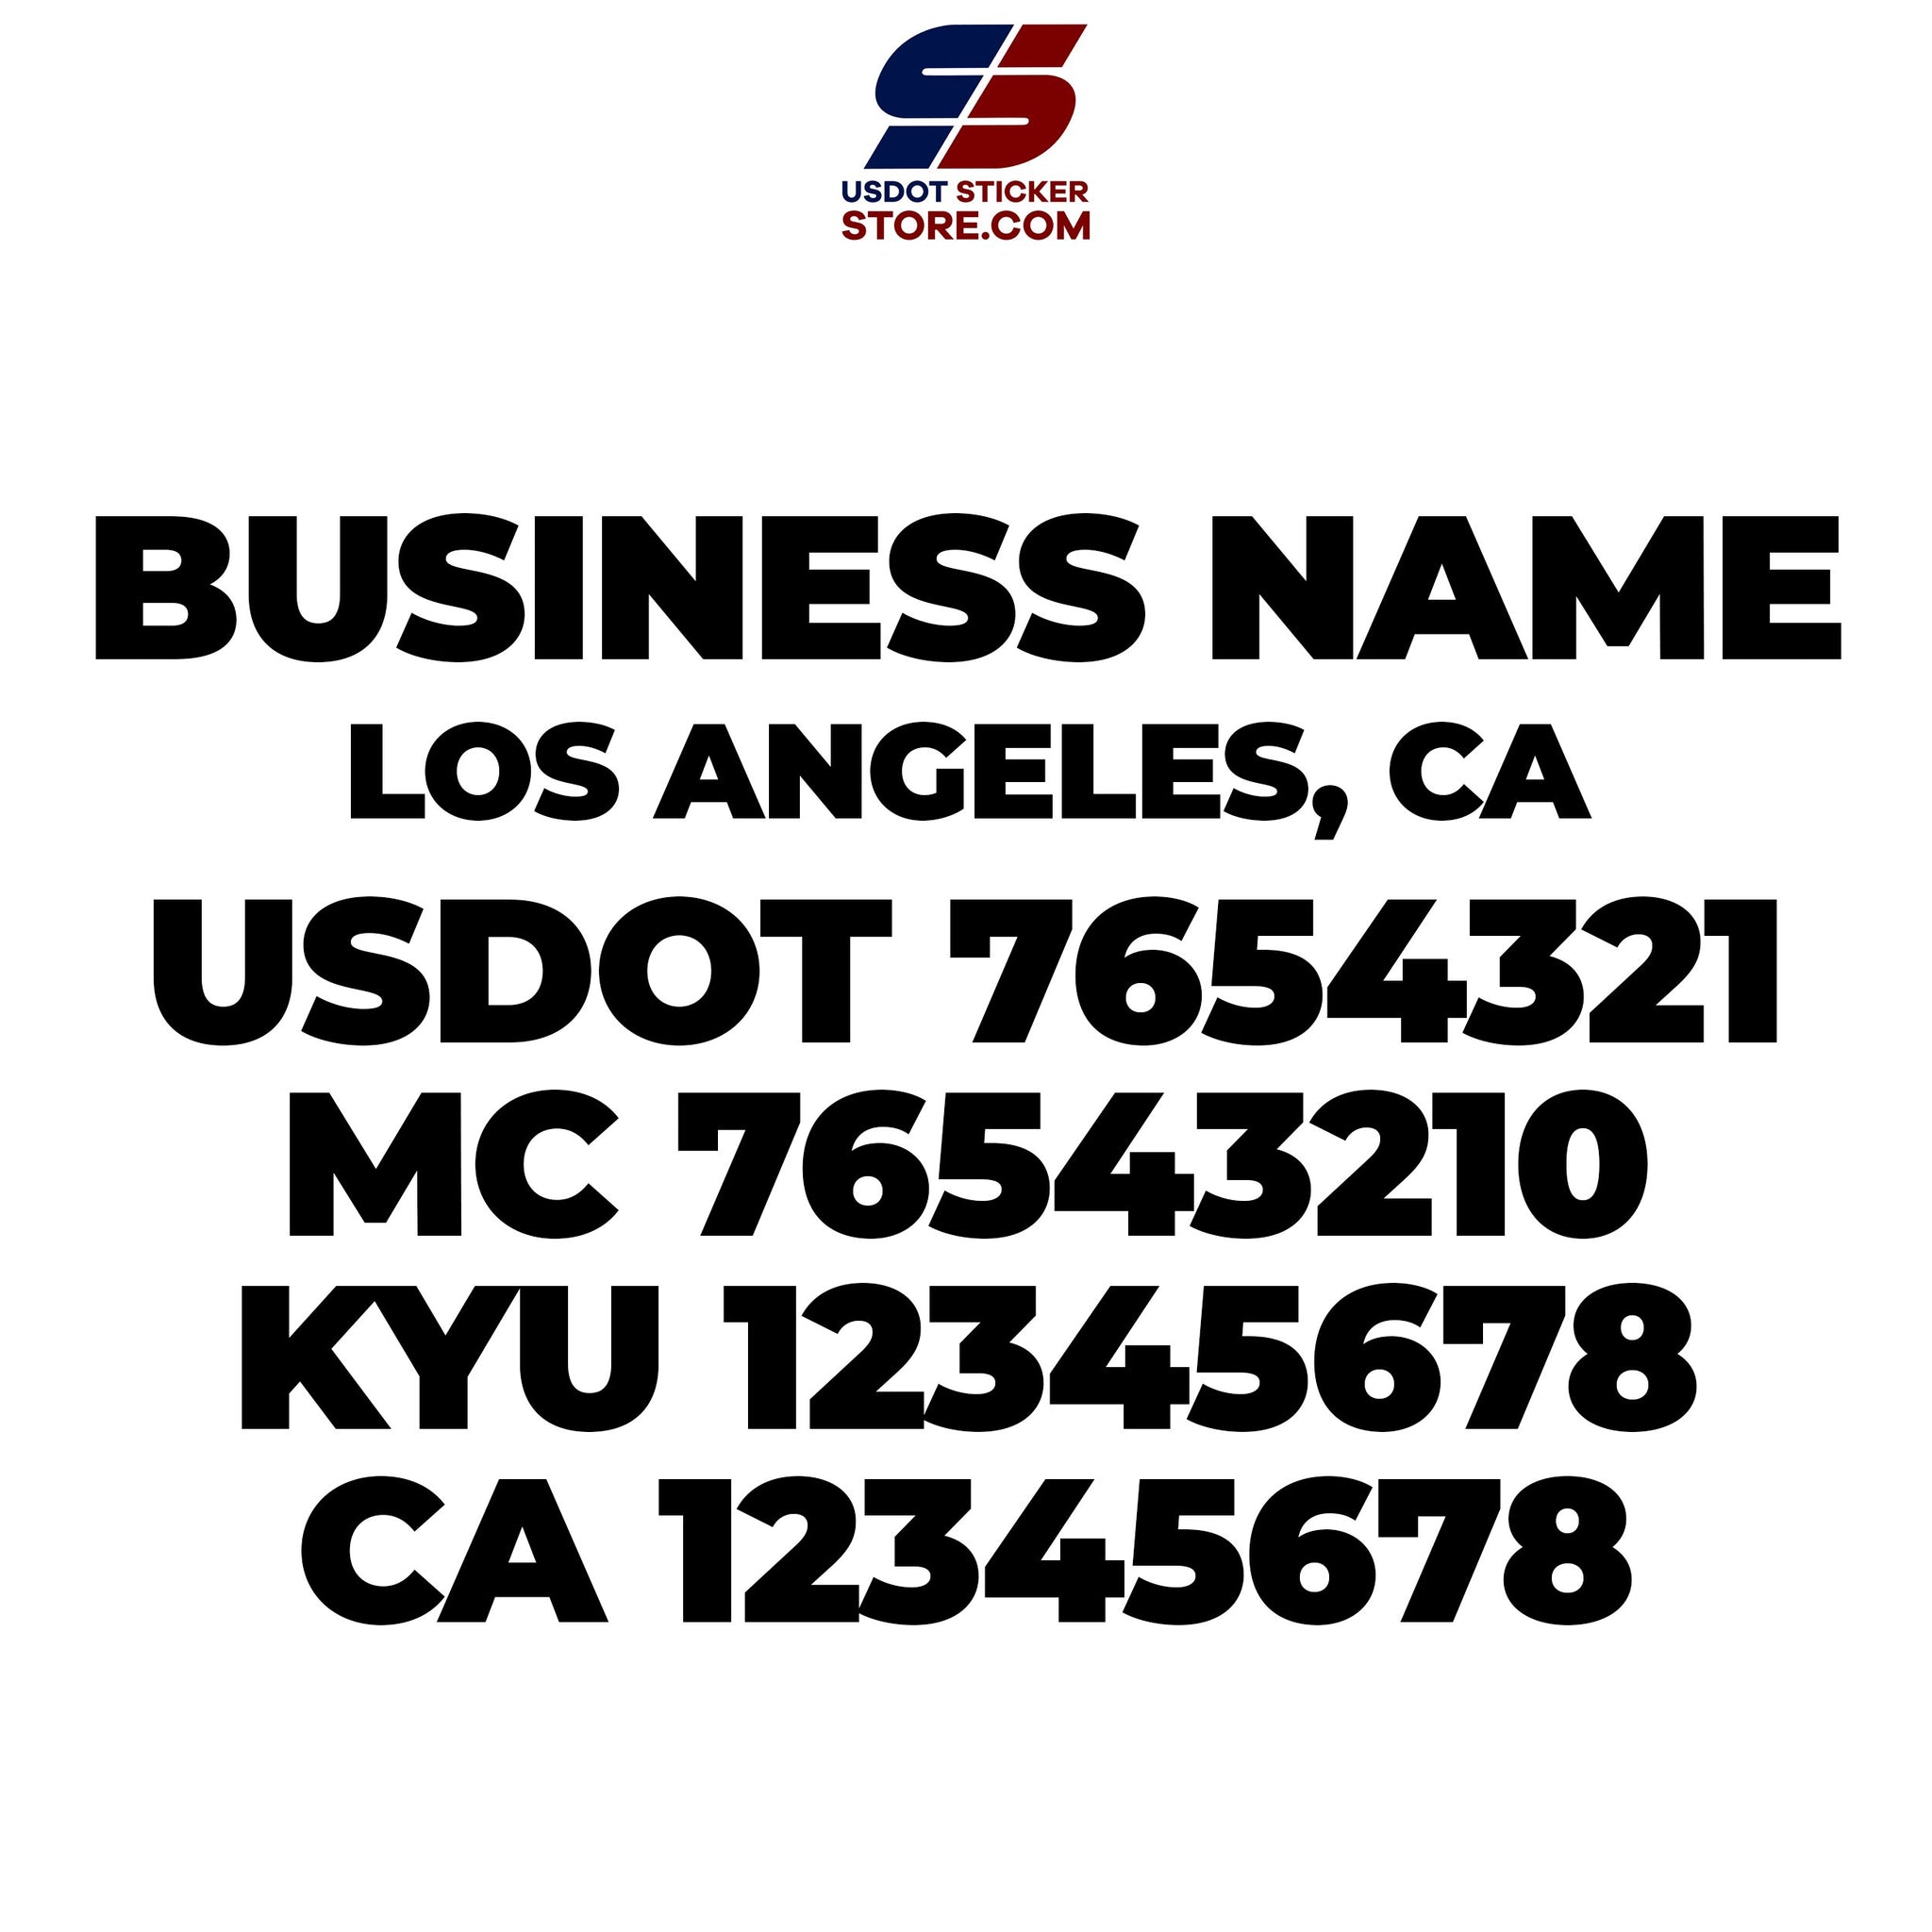 business name with location, usdot, mc, kyu & ca number decal